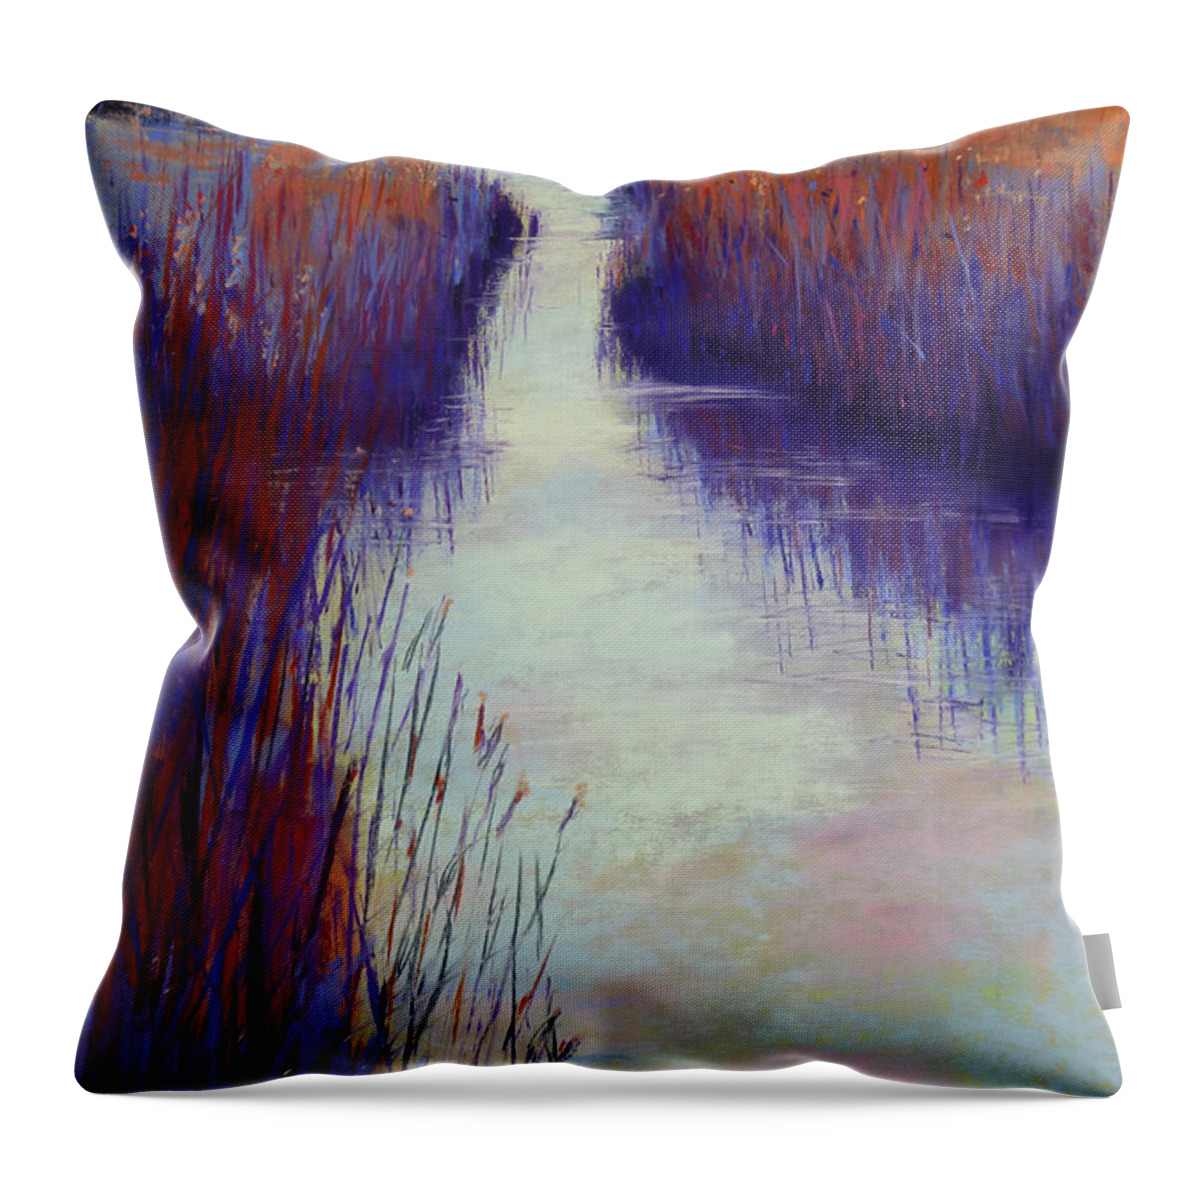 Landscape Throw Pillow featuring the painting Marshy Reeds by Lisa Crisman